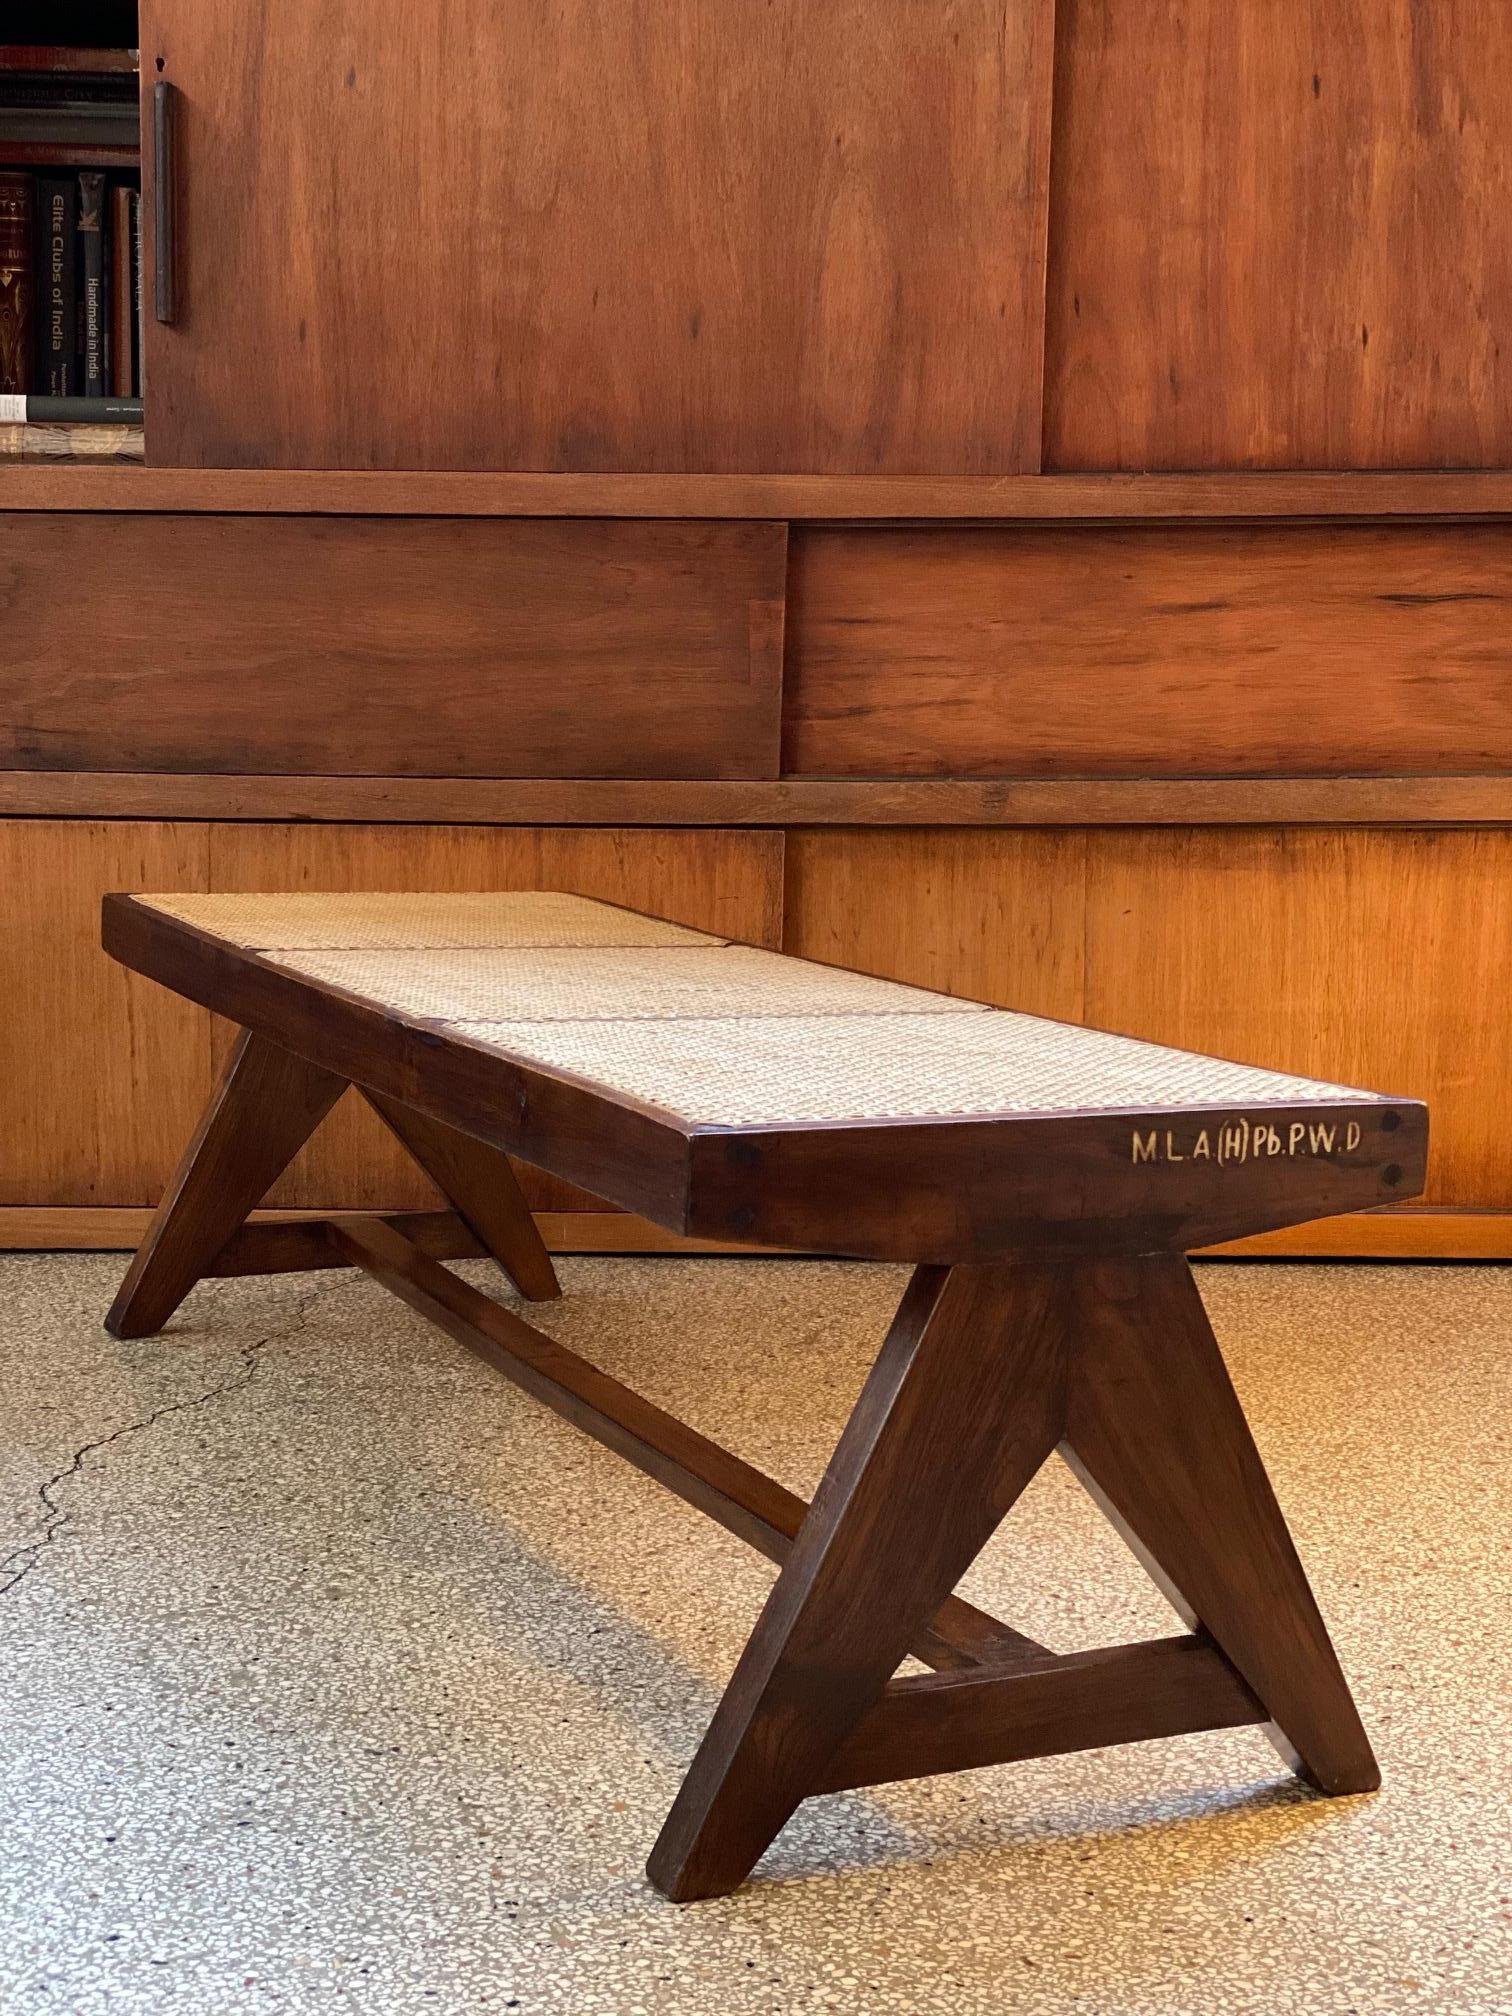 Pierre Jeanneret PJ-SI-33-B 
Important: Vintage collector's item for sale with guaranteed authenticity. 
Caned bench
Solid teak, cane.
Chandigarh, India, M.L.A. Hostel/ Flats (1956).